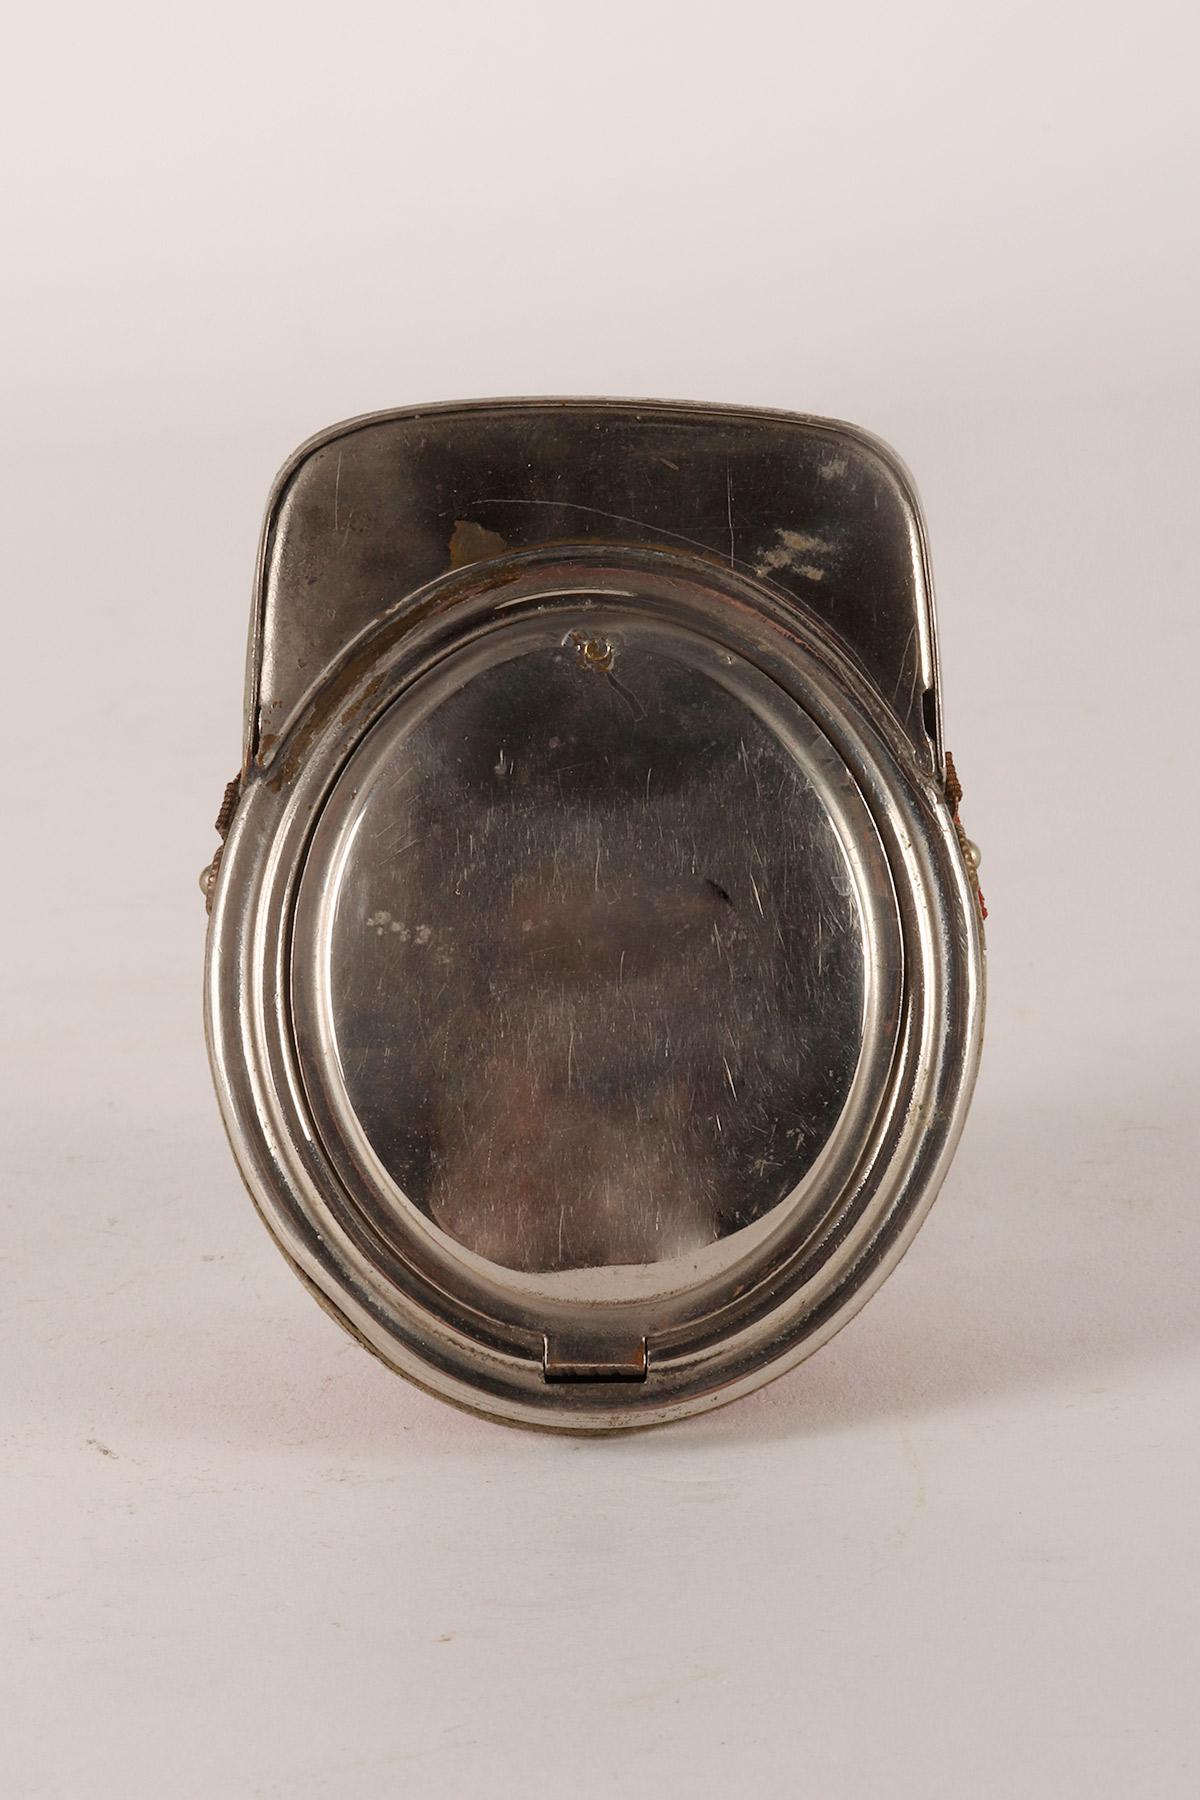 A military cap snuffbox, Paris, France beginning of 20th century For Sale 2